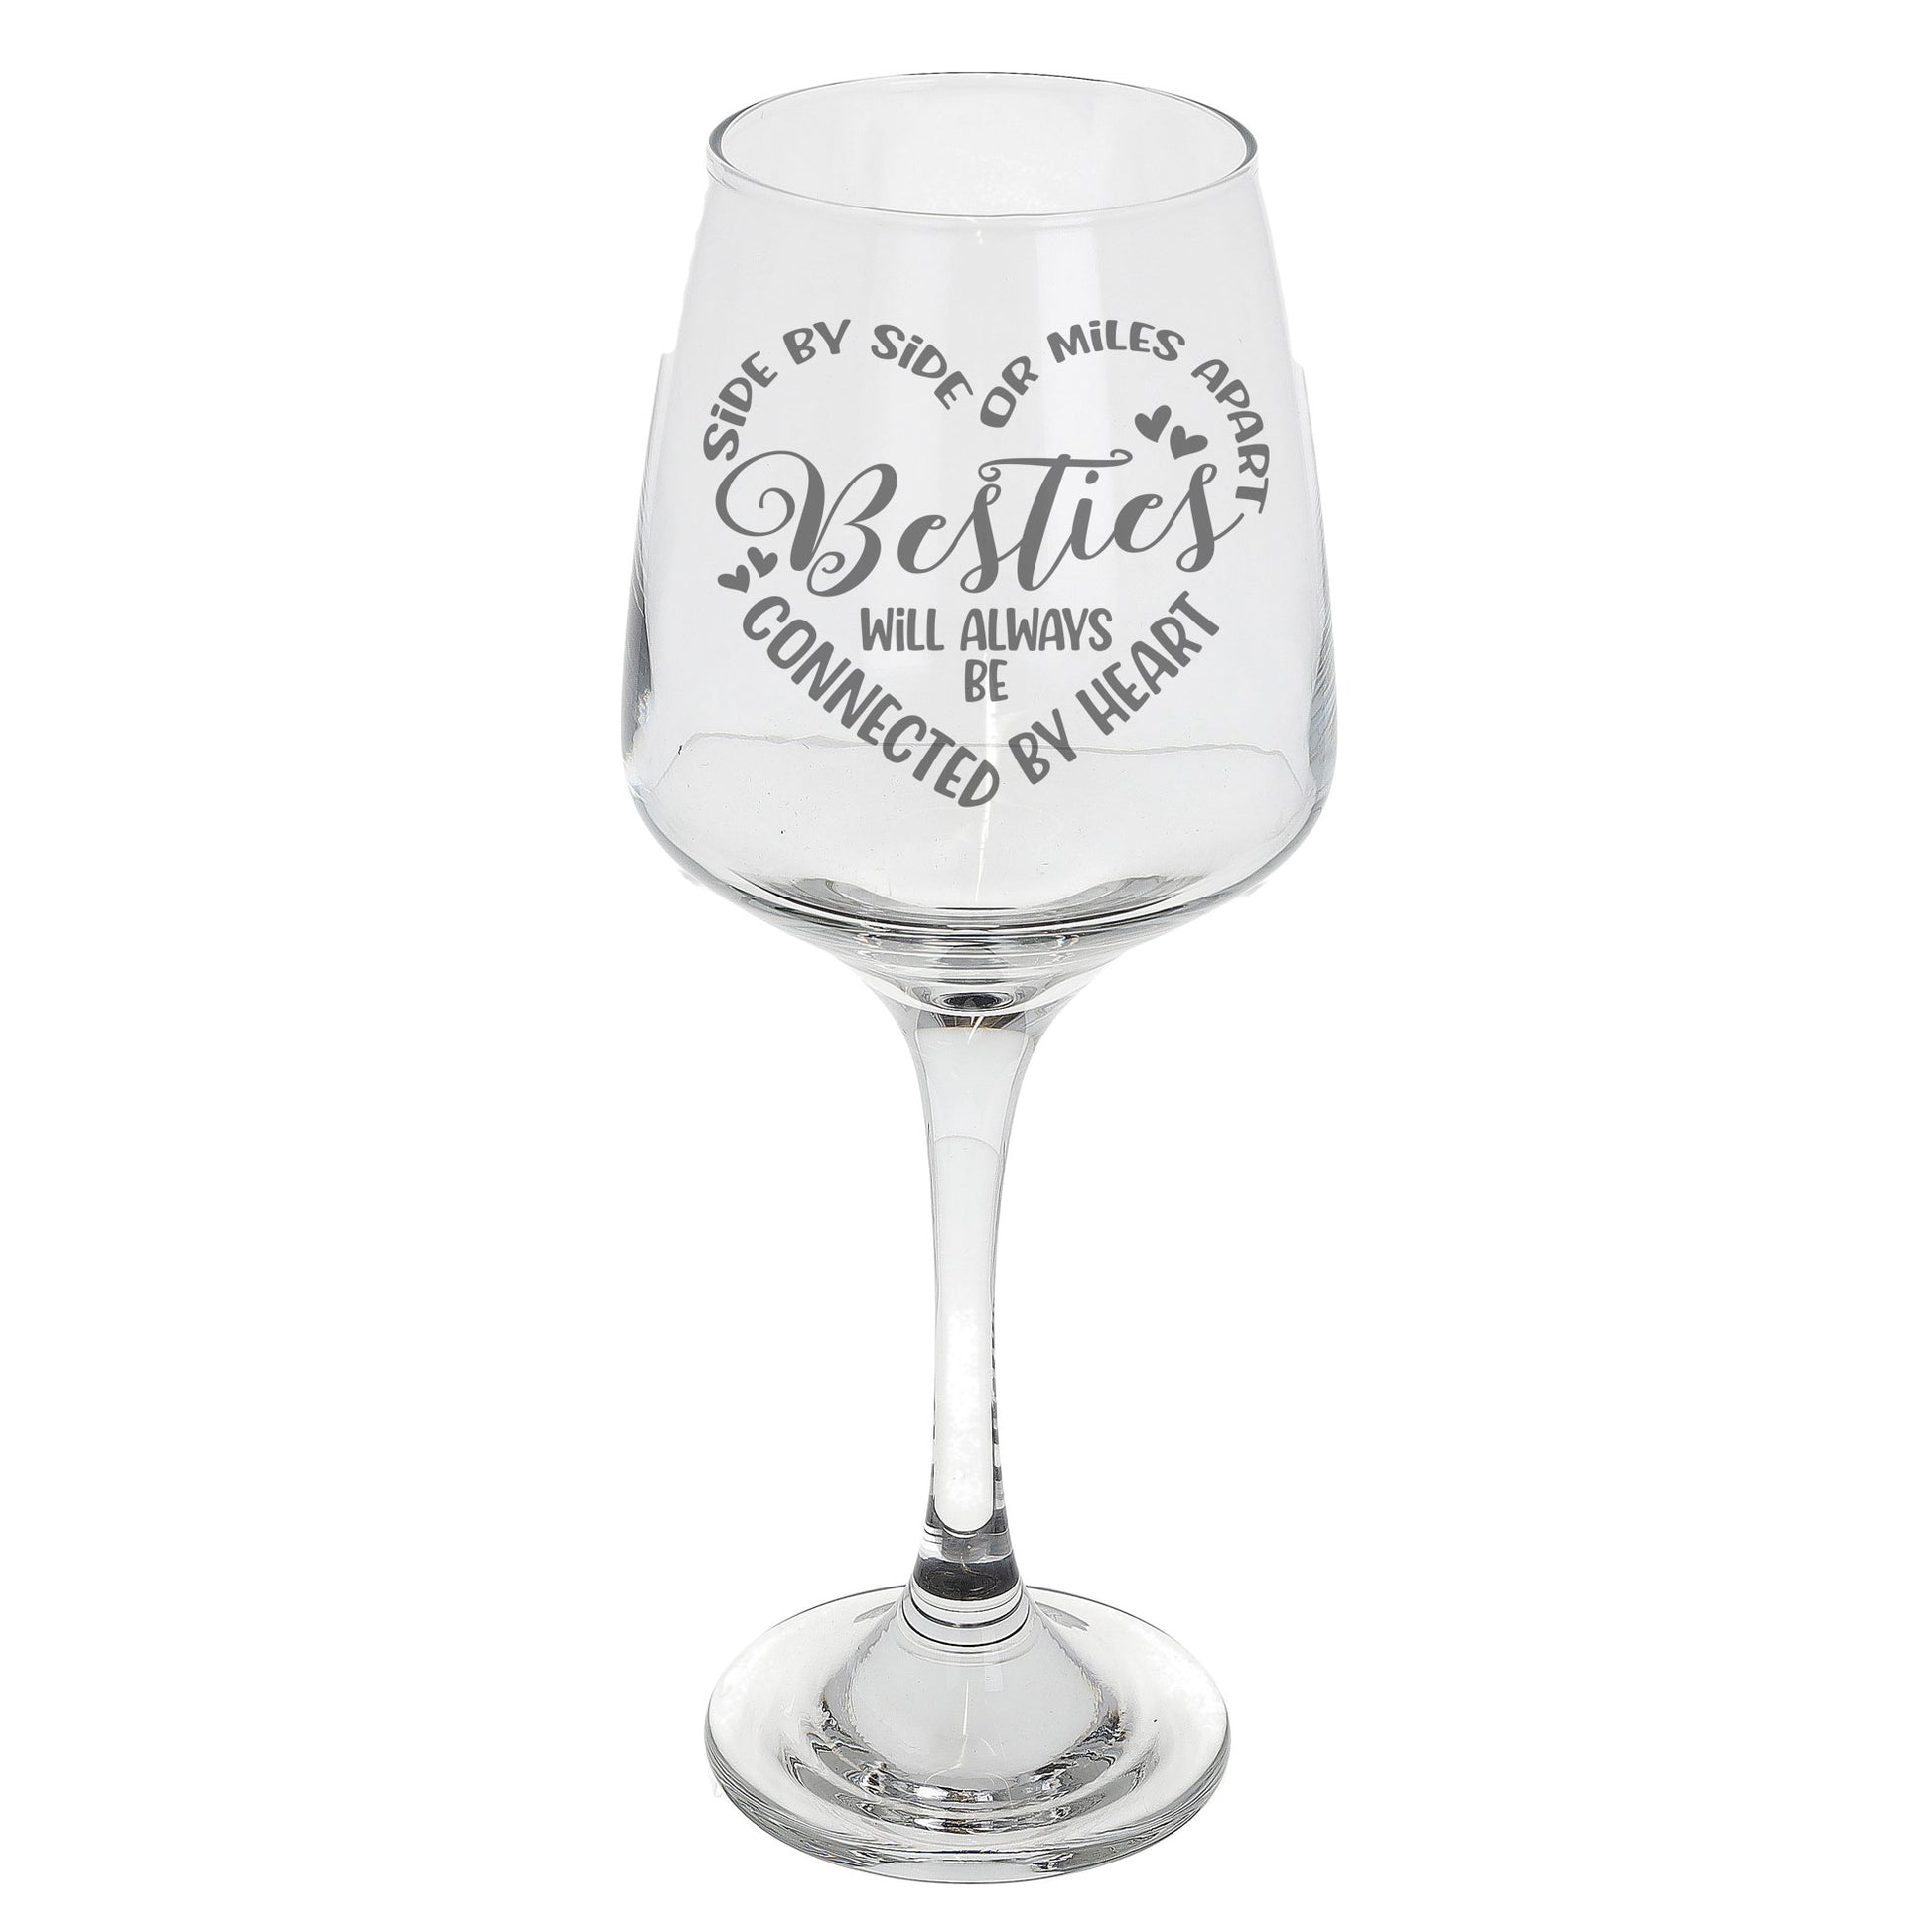 Besties Connected By Heart Engraved Wine Glass and/or Coaster Set  - Always Looking Good - Wine Glass Only  